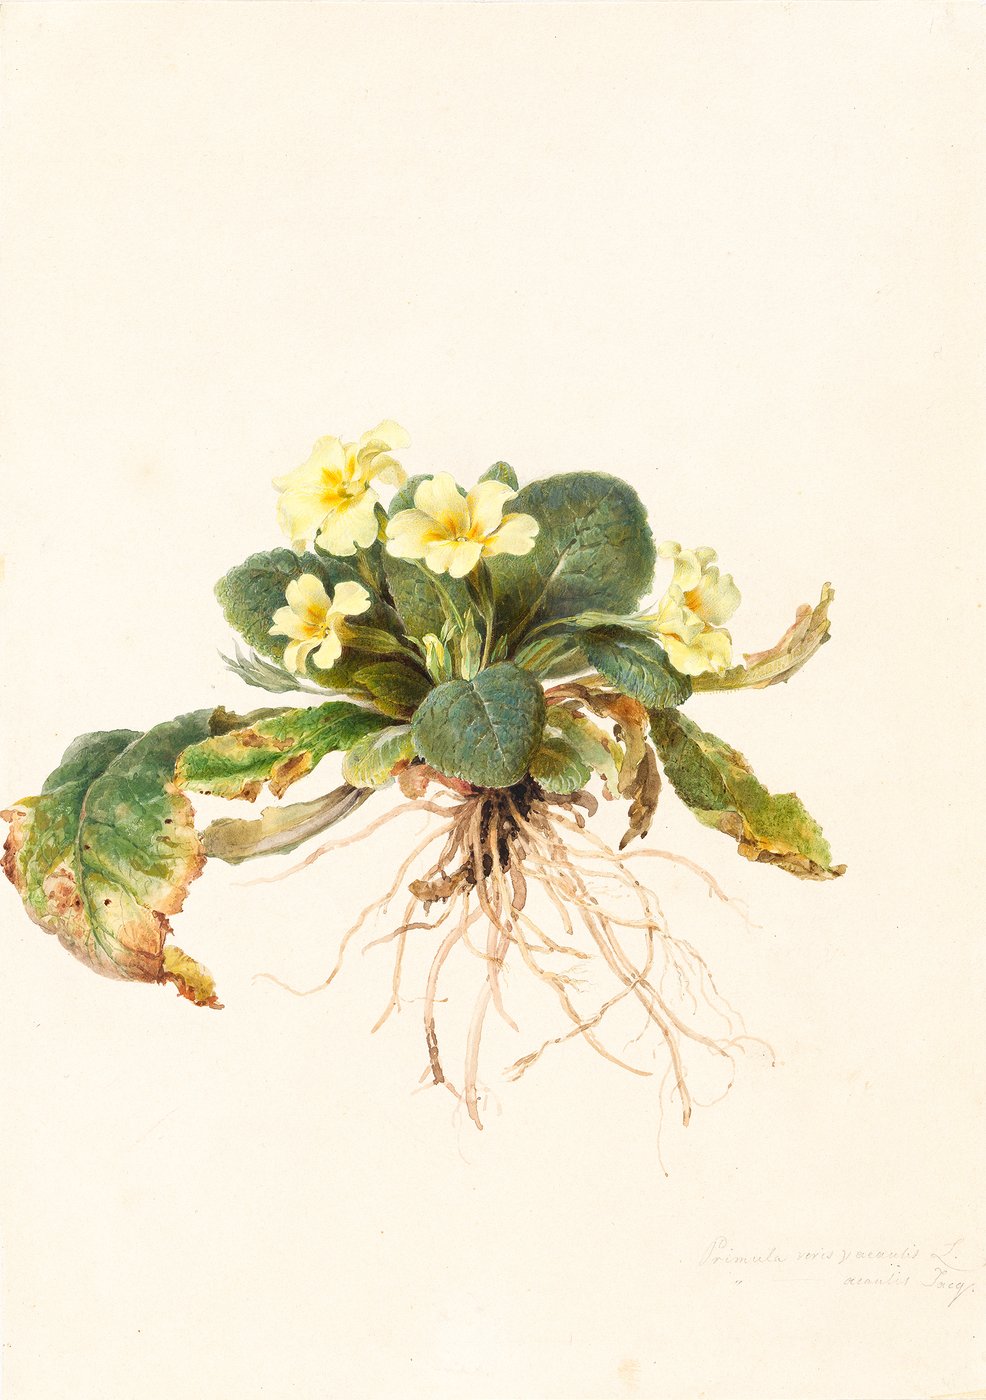 A very precisely executed watercolour showing yellow, delicate primroses in the centre of the picture against a light background, together with leaves and roots at the bottom. The outer edges of the leaves show signs of withering, so the colour changes from green to brown.